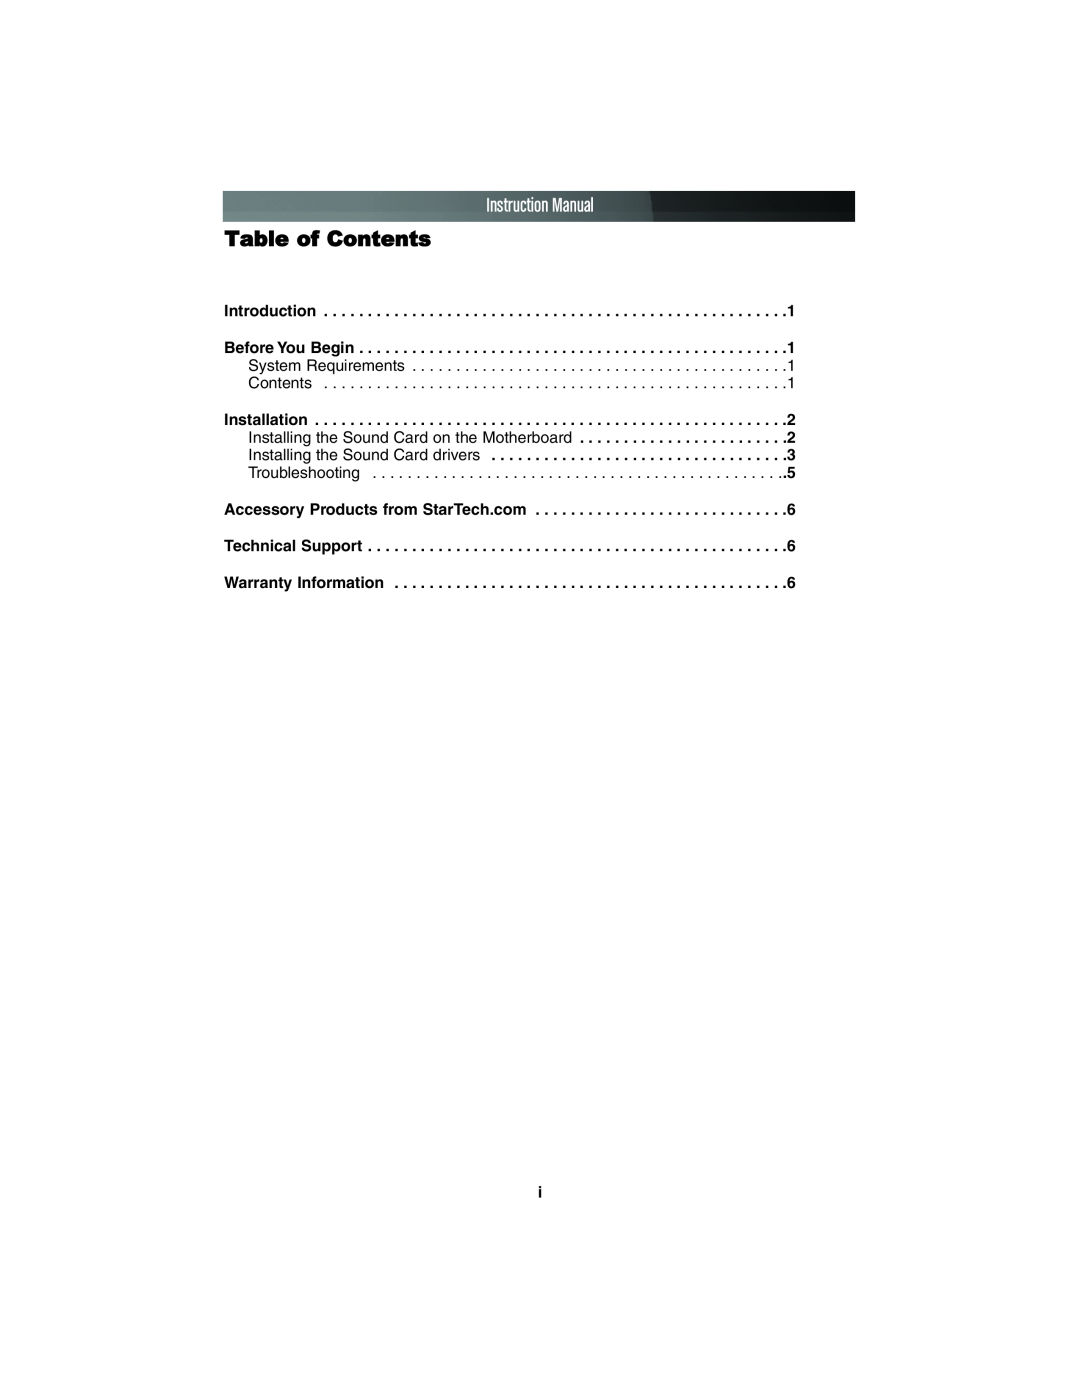 StarTech.com PCISOUND4CH instruction manual Table of Contents 